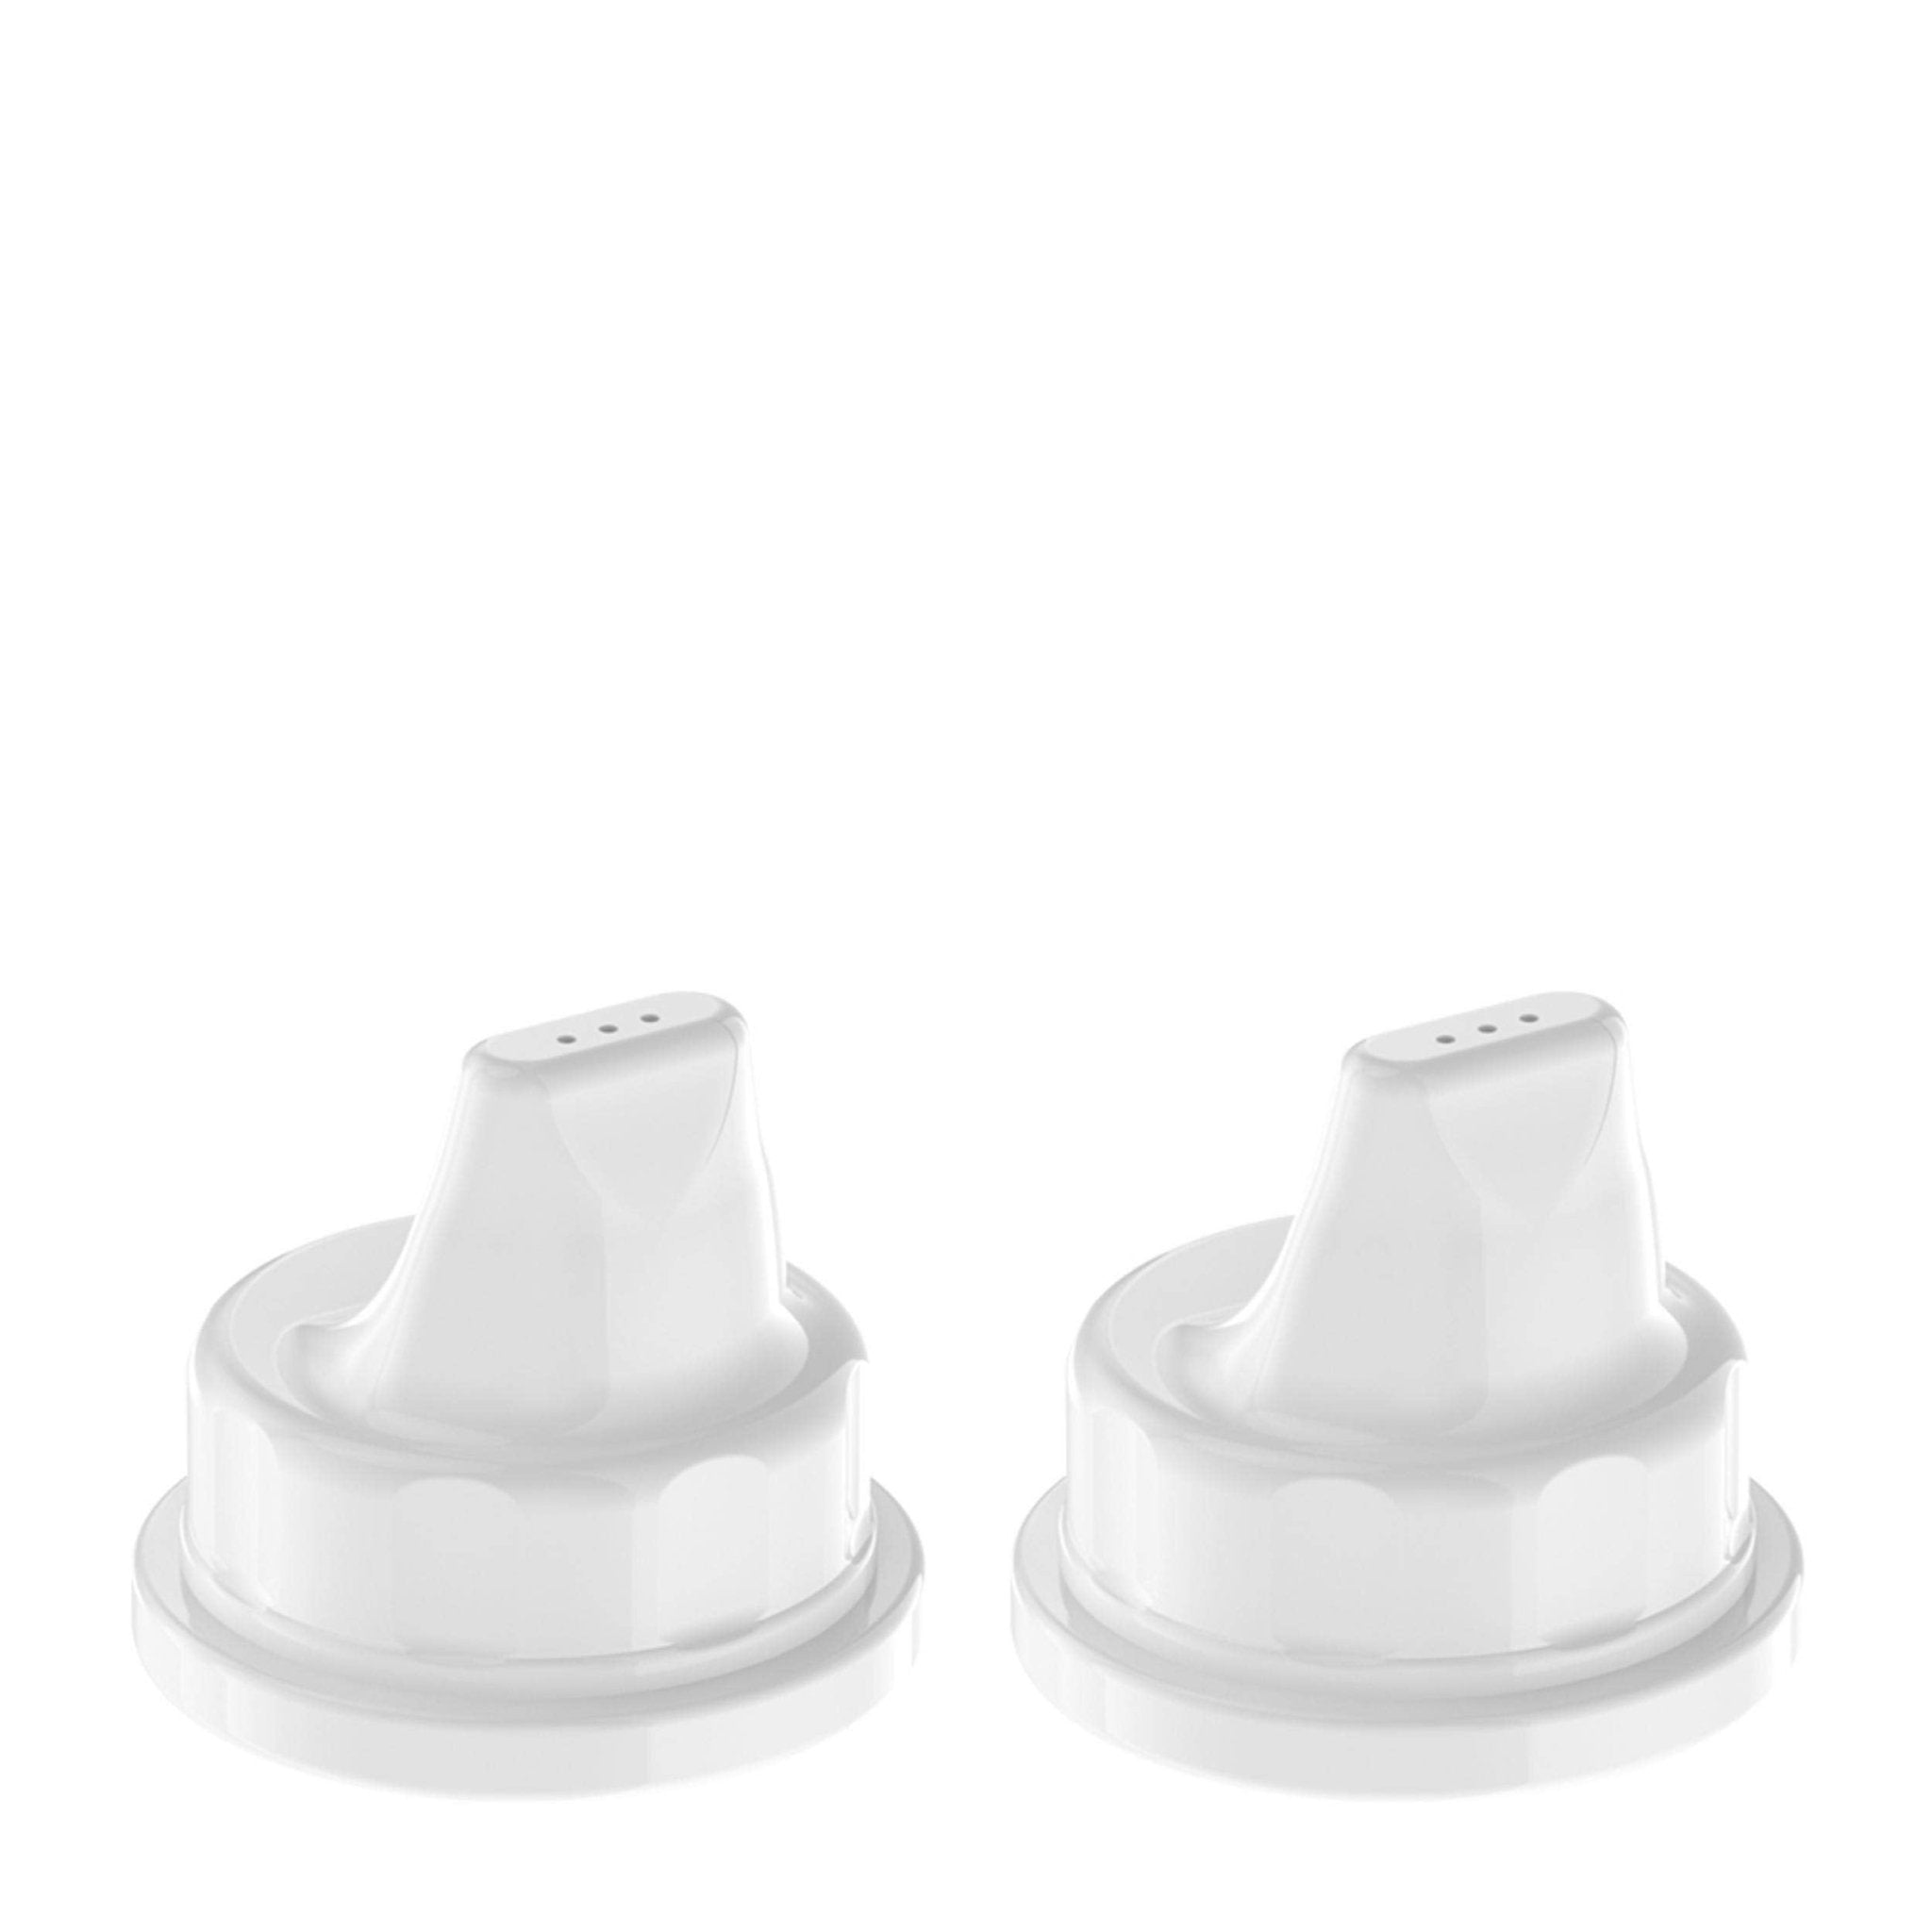 Lifefactory Sippy Caps for 4-Ounce and 9-Ounce, White, Pack of 2 - ANB Baby -8149430234044 oz. Bottles